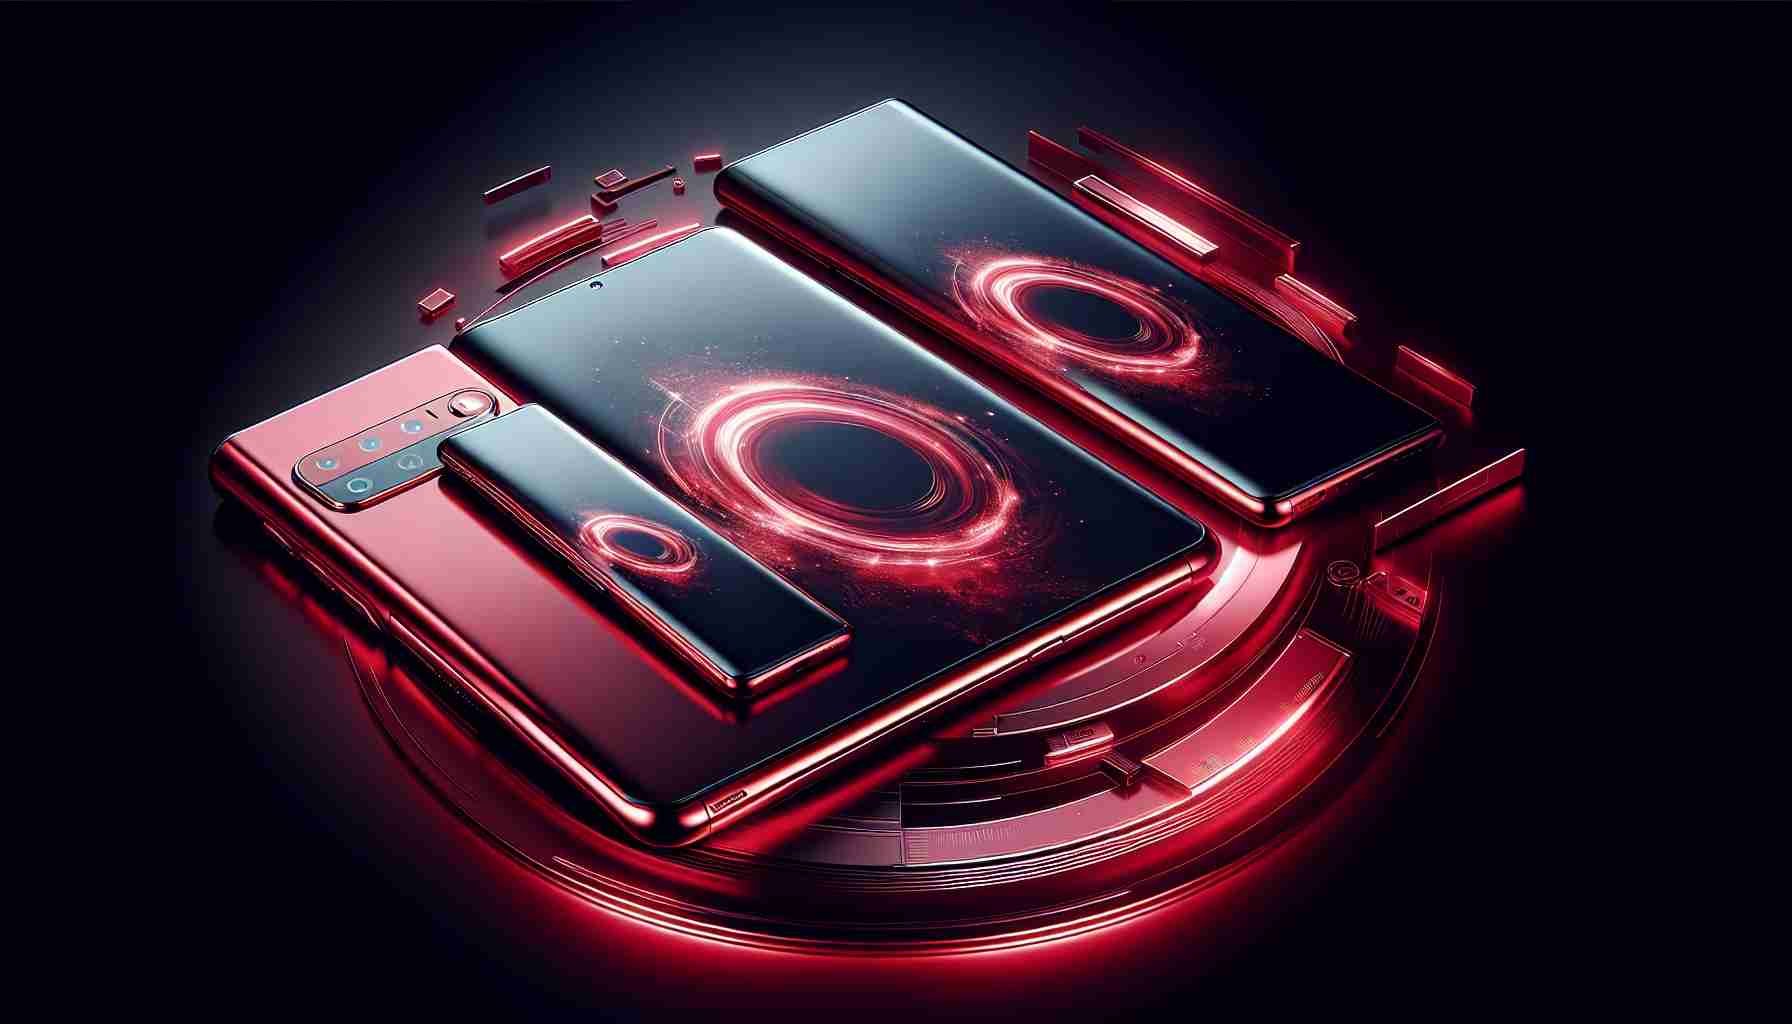 A high-definition, realistic image showcasing the latest concept of new galaxy technological devices in a red hue, redefining the boundaries of technology. The devices are elegantly designed, embodying a modern aesthetic. The striking red color gives them a unique personality, indicating their capability to revolutionize the tech world.